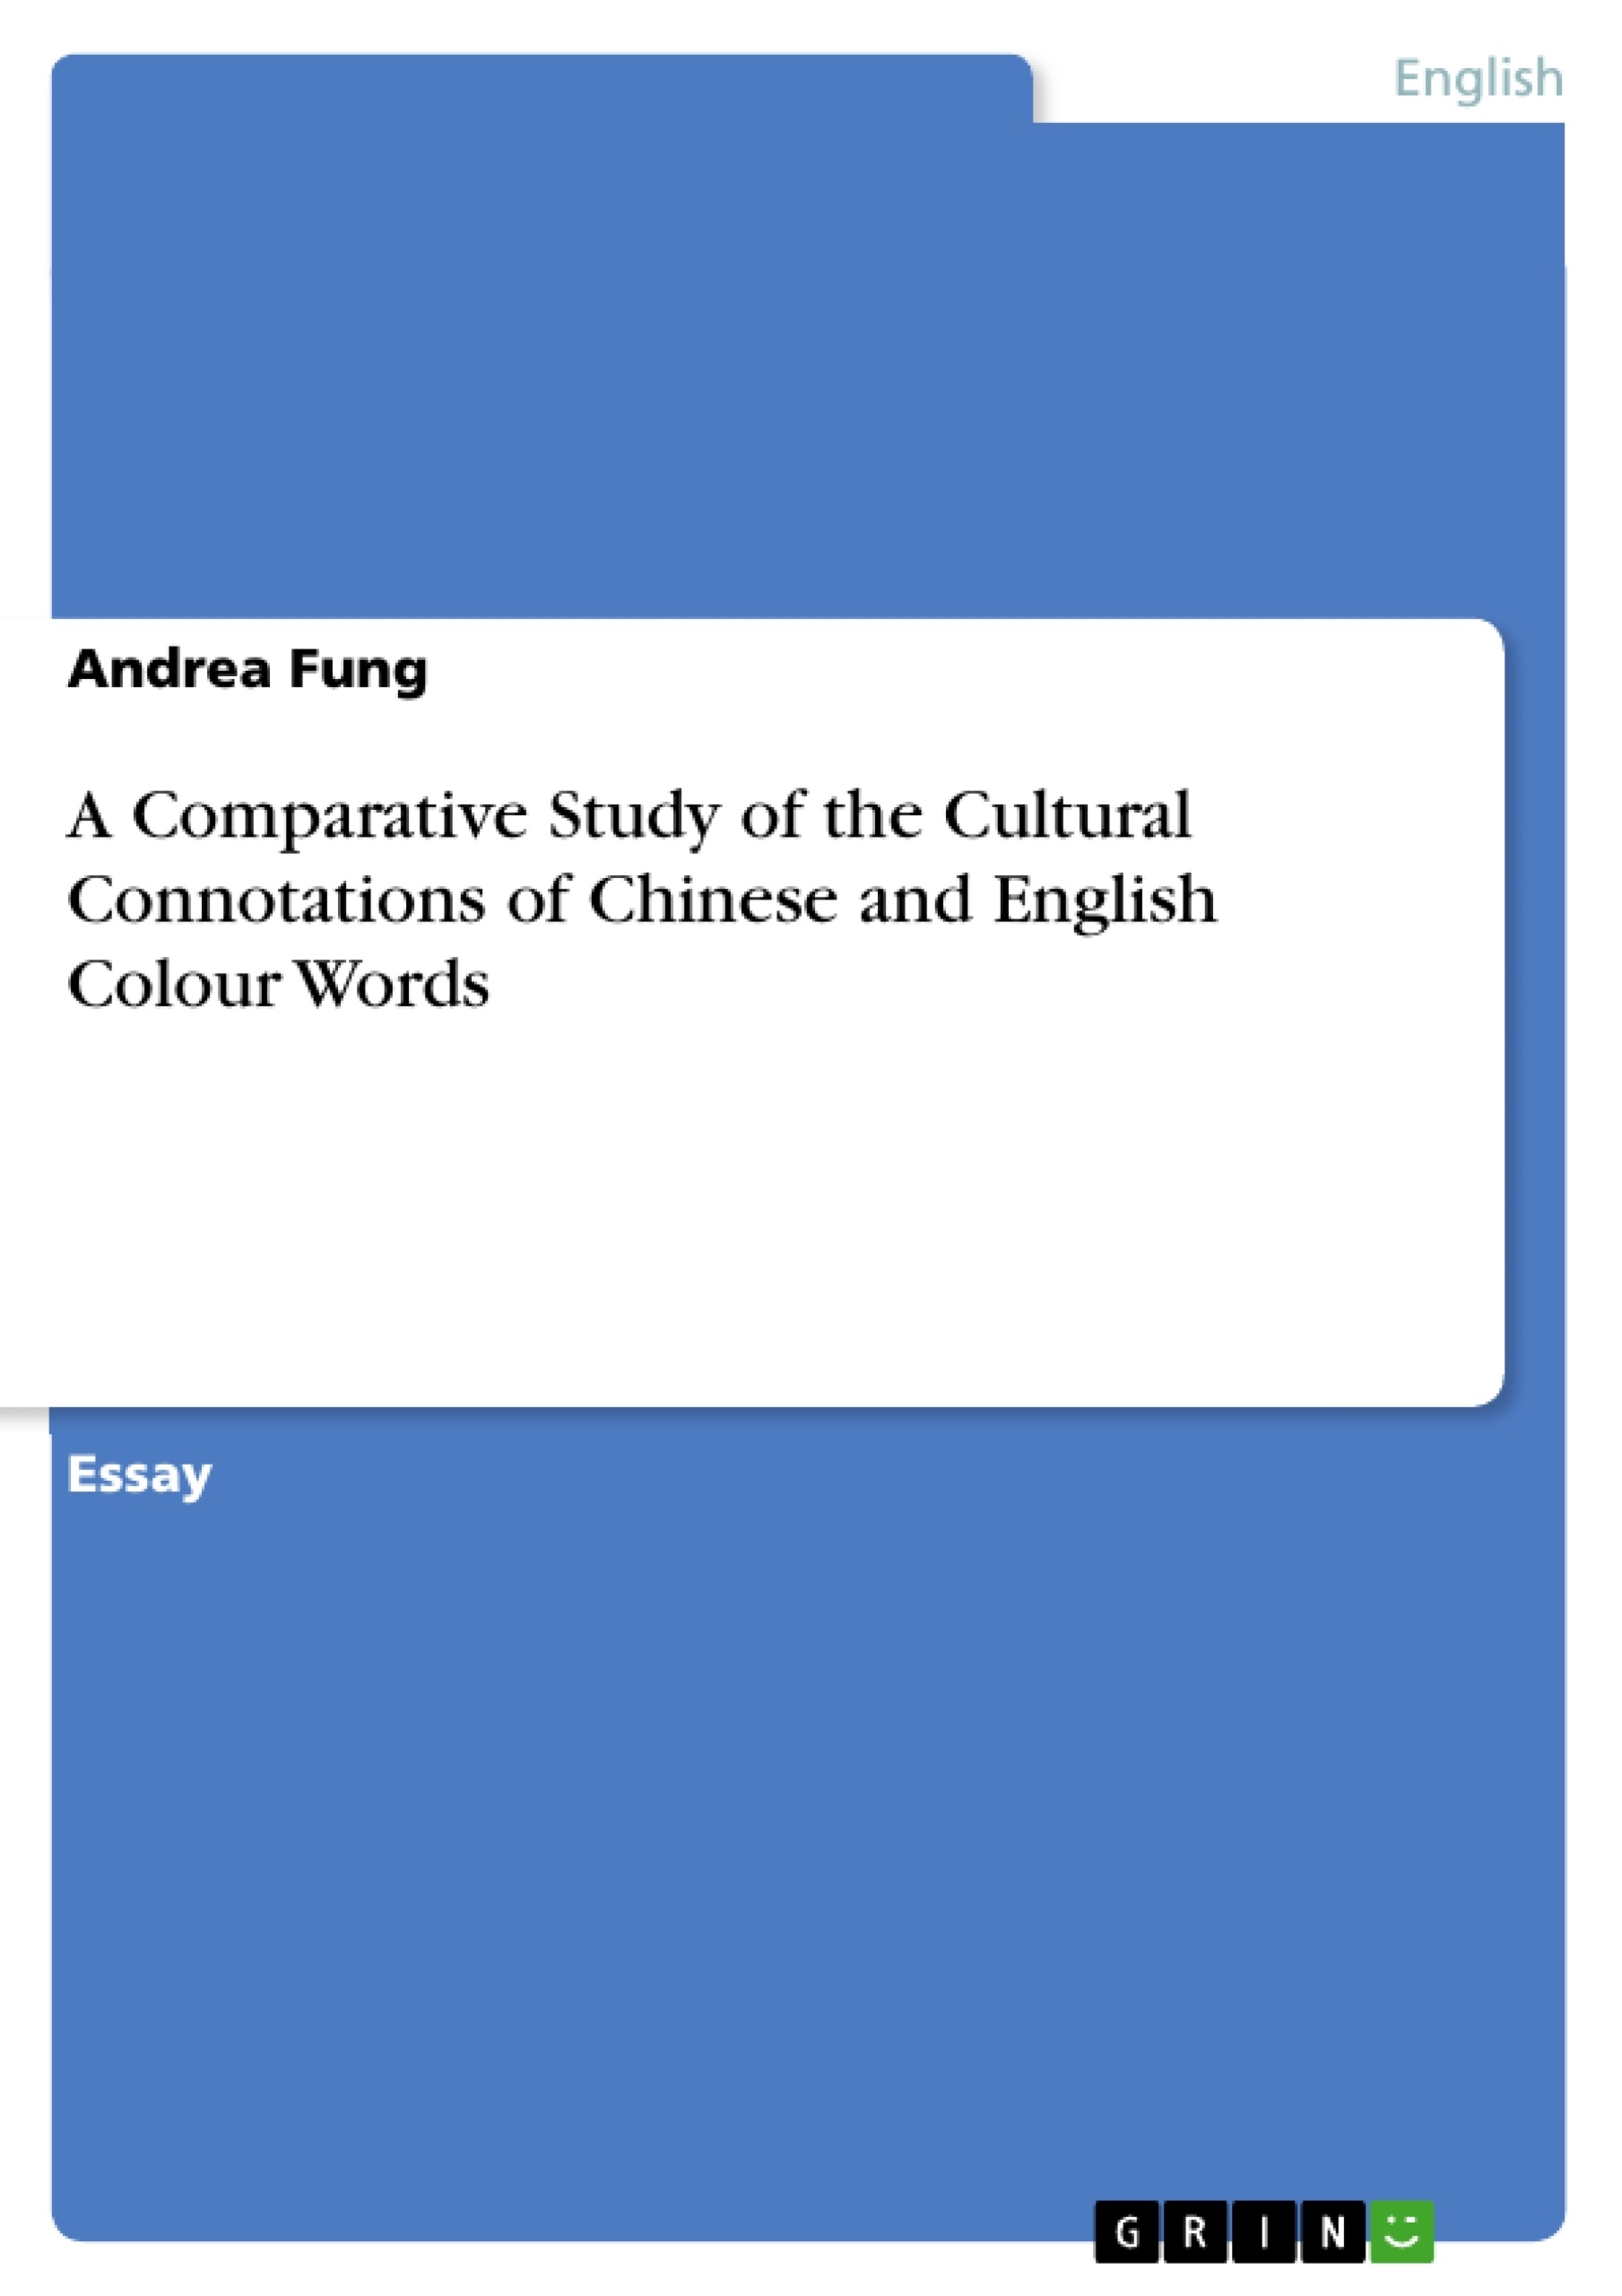 Título: A Comparative Study of the Cultural Connotations of Chinese and English Colour Words